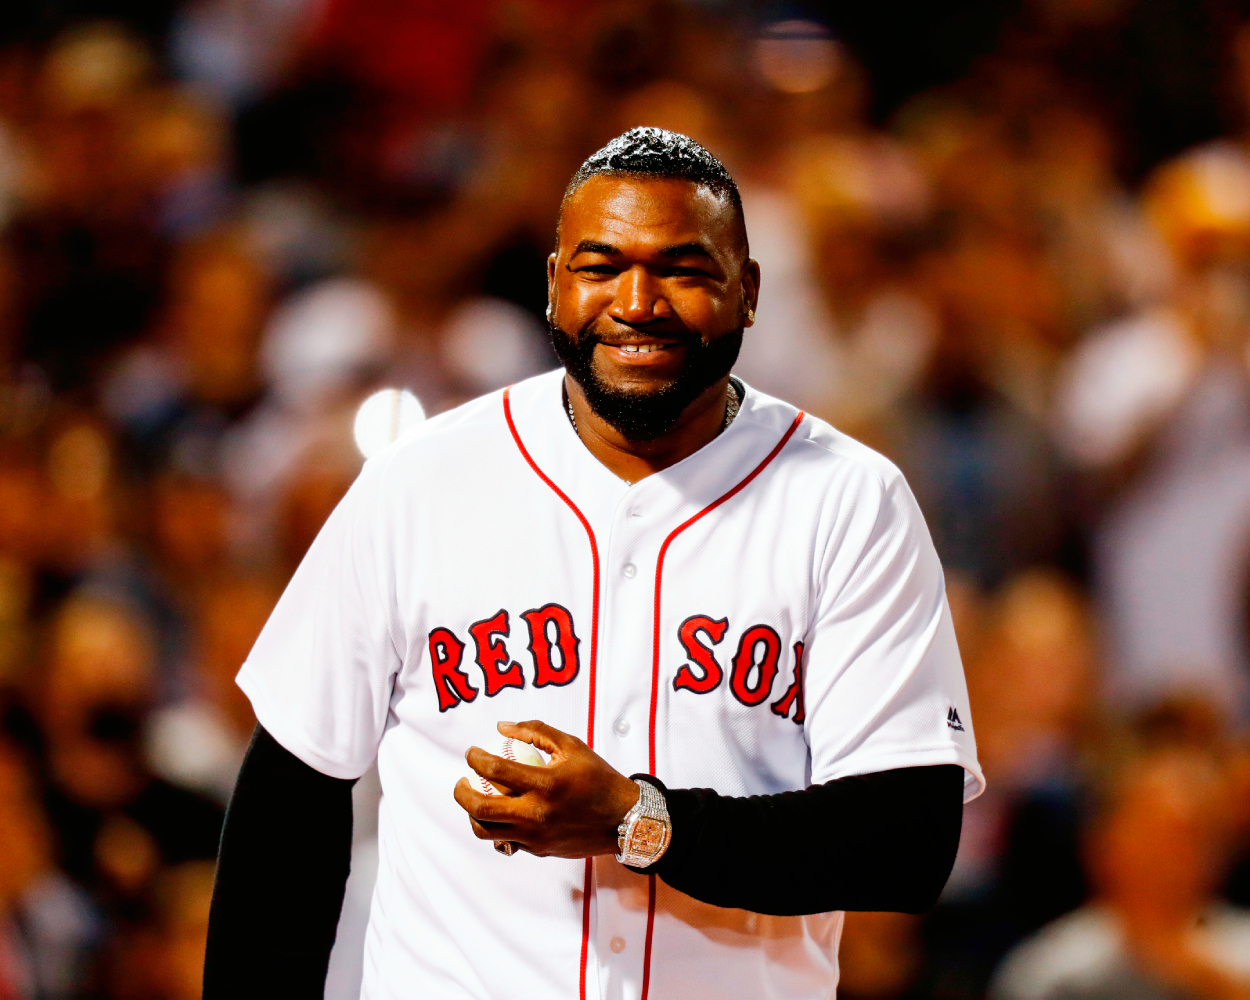 Former Boston Red Sox great David Ortiz reacts before the game between the Boston Red Sox and the New York Yankees at Fenway Park on September 26, 2021, in Boston, Massachusetts.